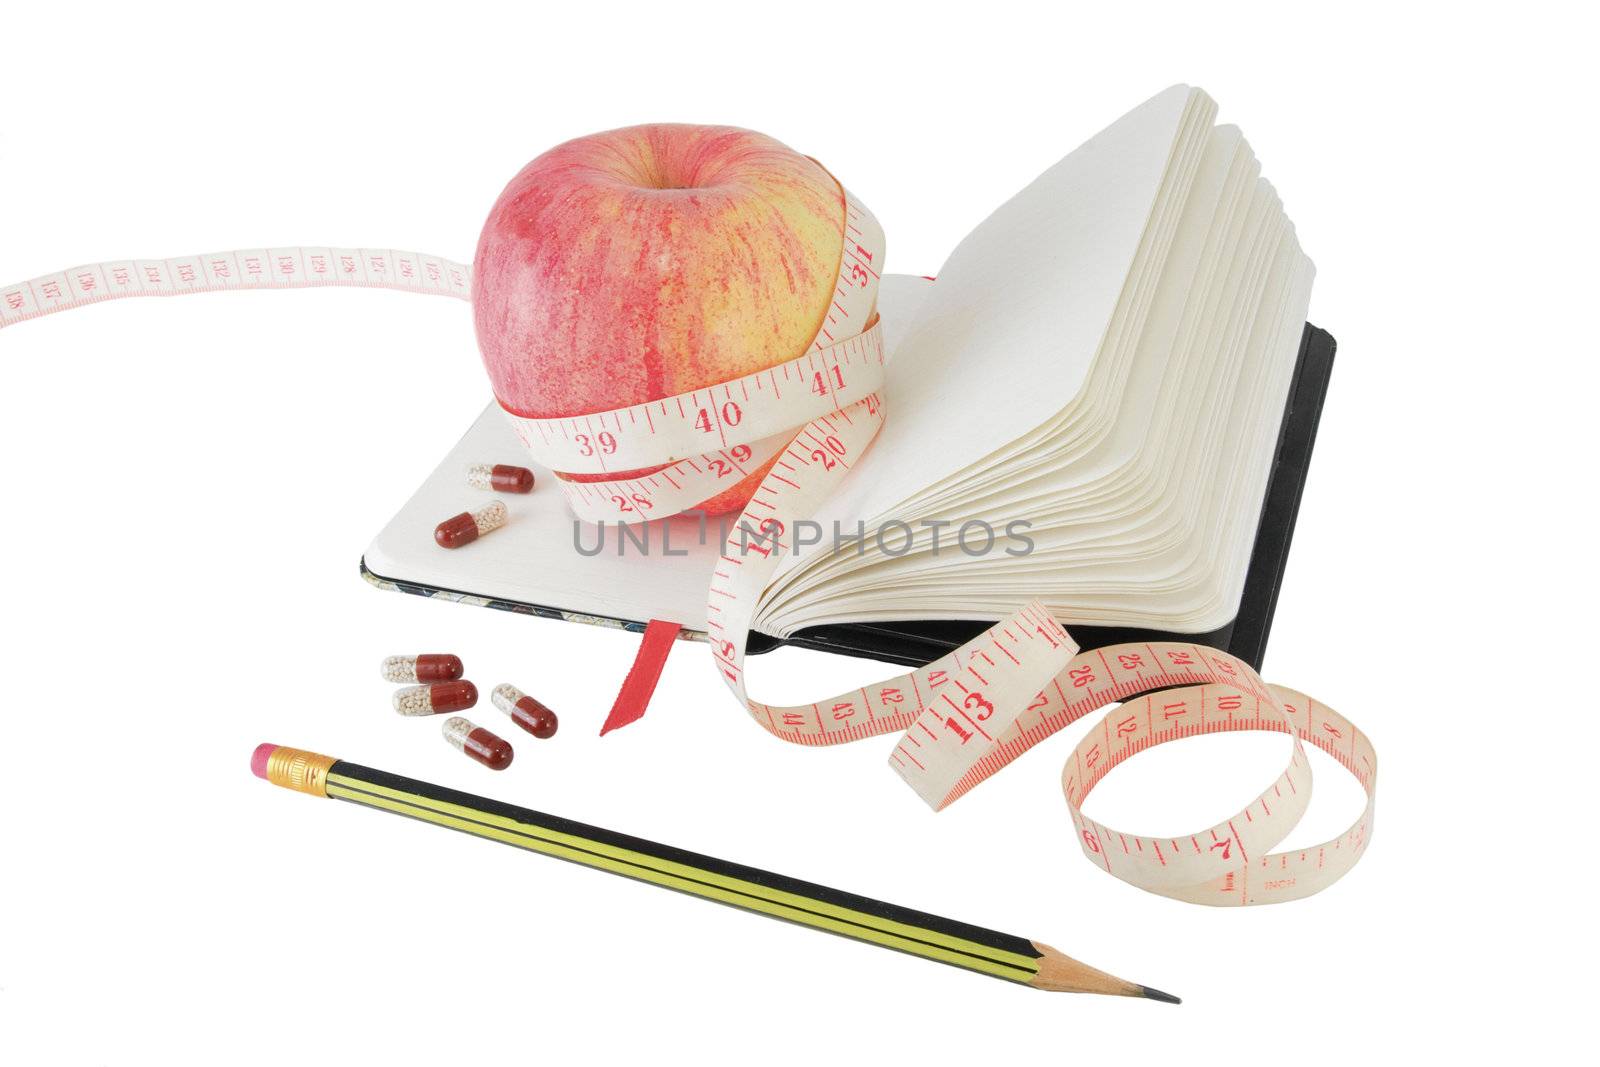 Copybook with apple, measure tape and vitamin pills to aid effective diet